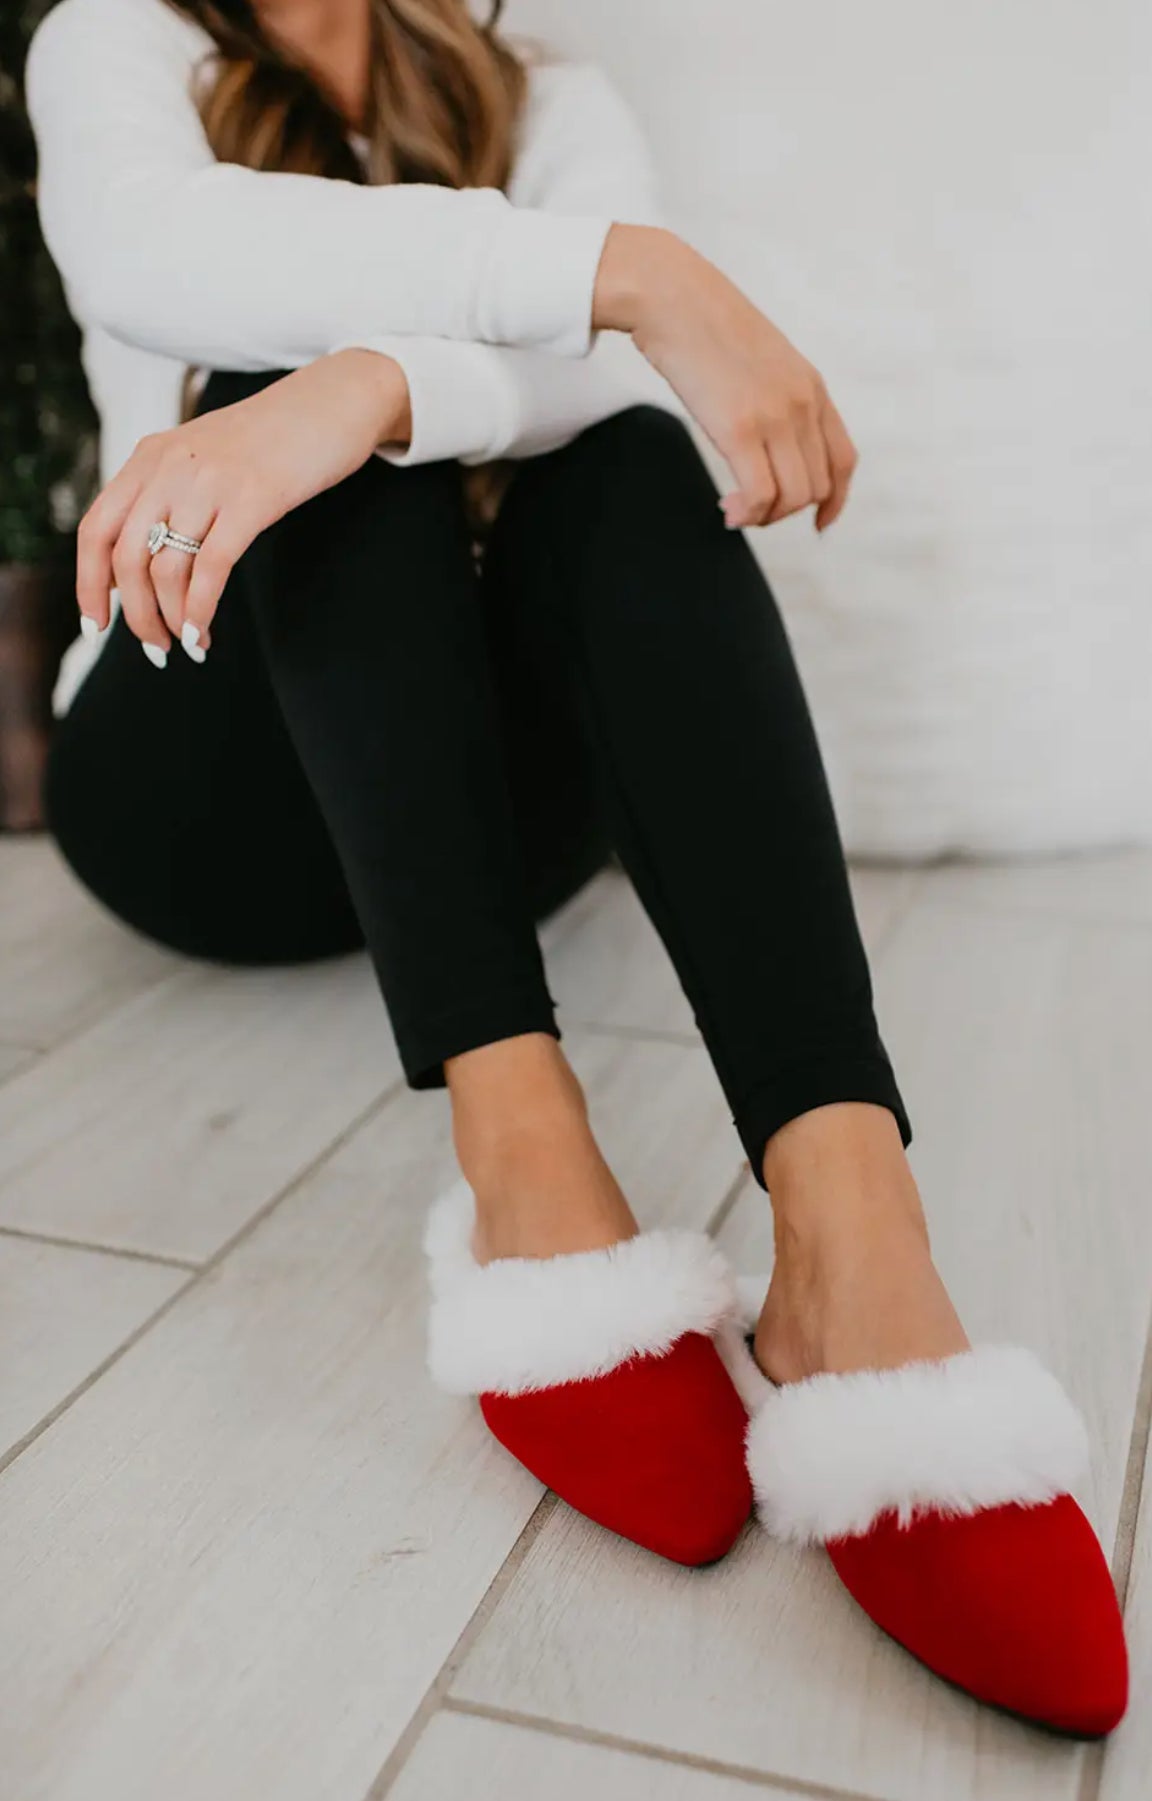 women sitting on ground wearing red and white Santa Slippers